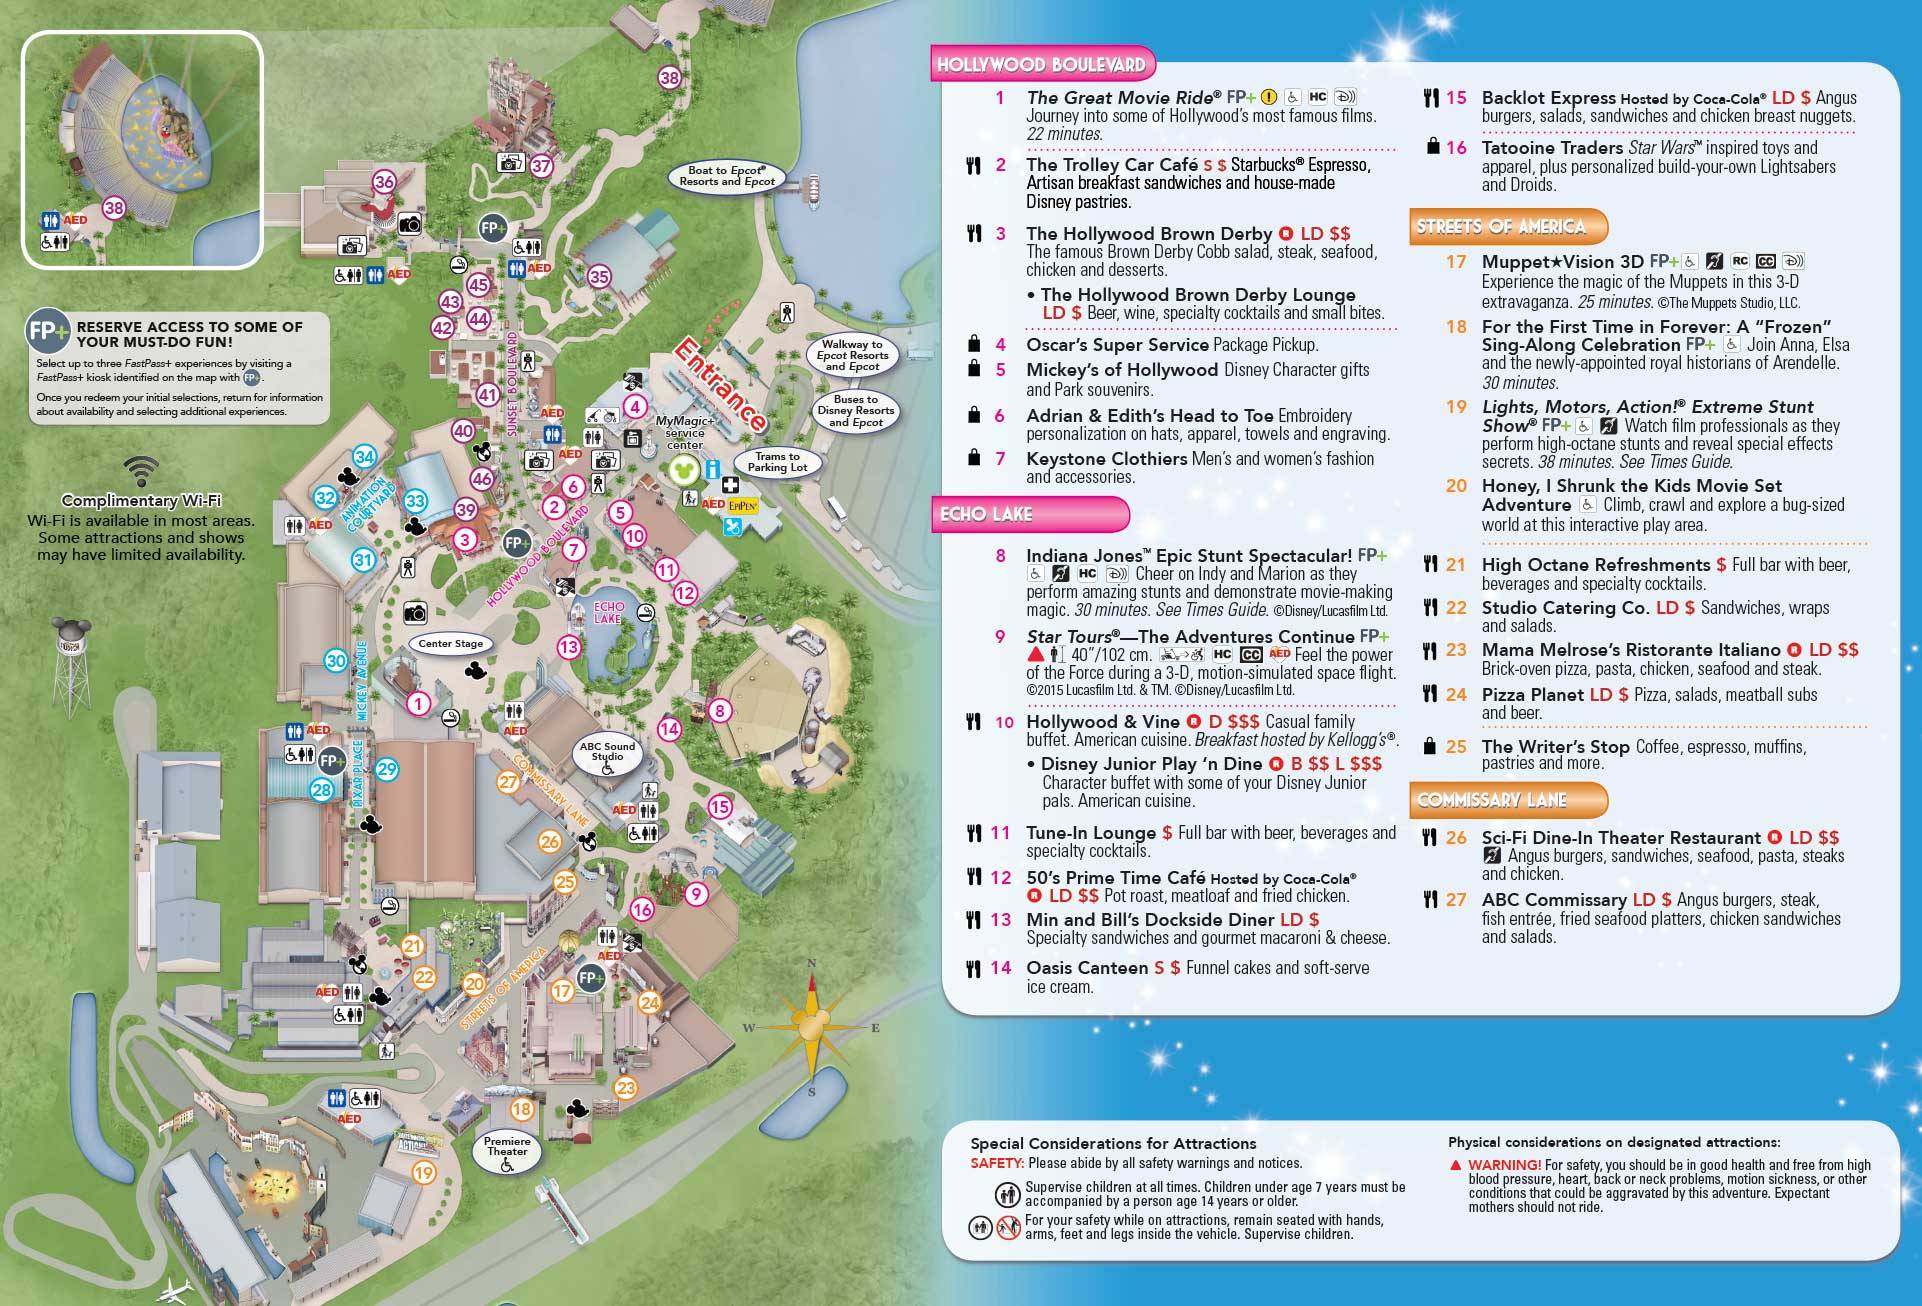 Guide map with Center Stage